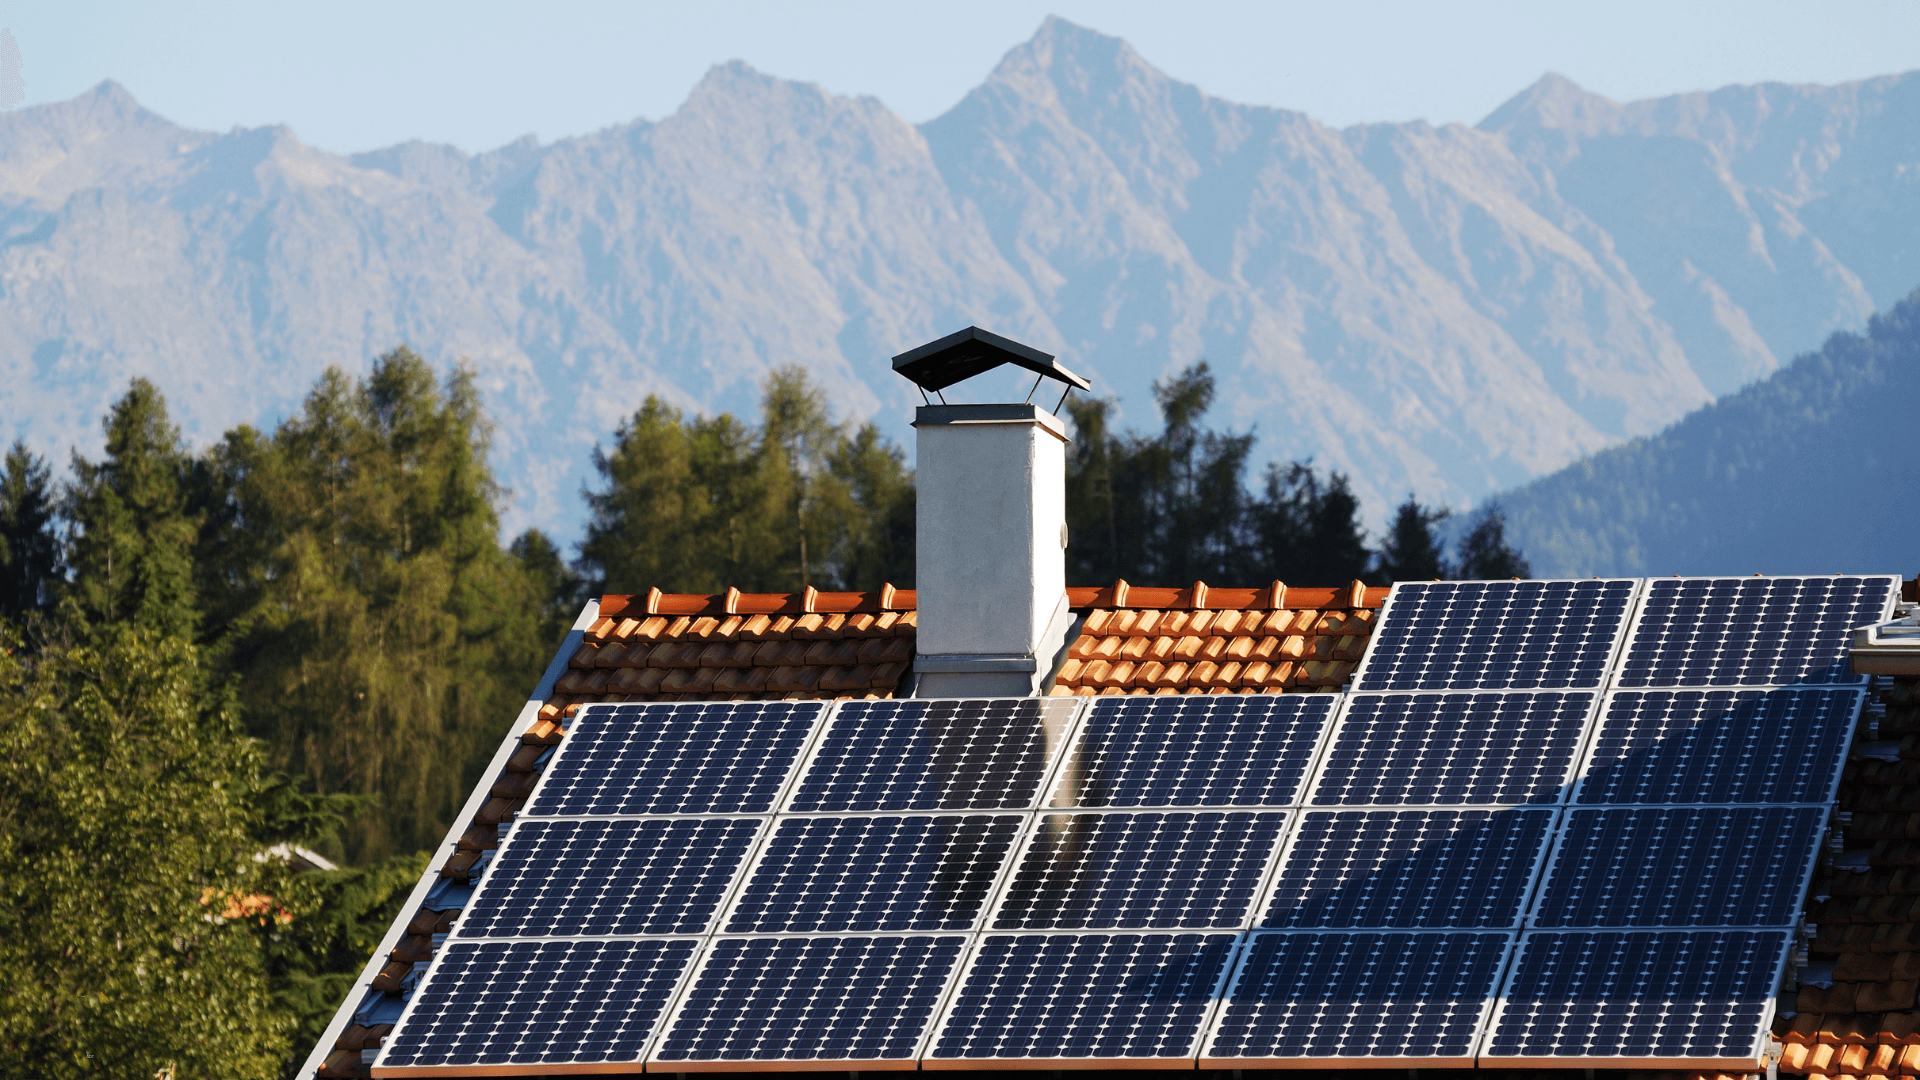 Several solar panels on a house with mountains in the background 